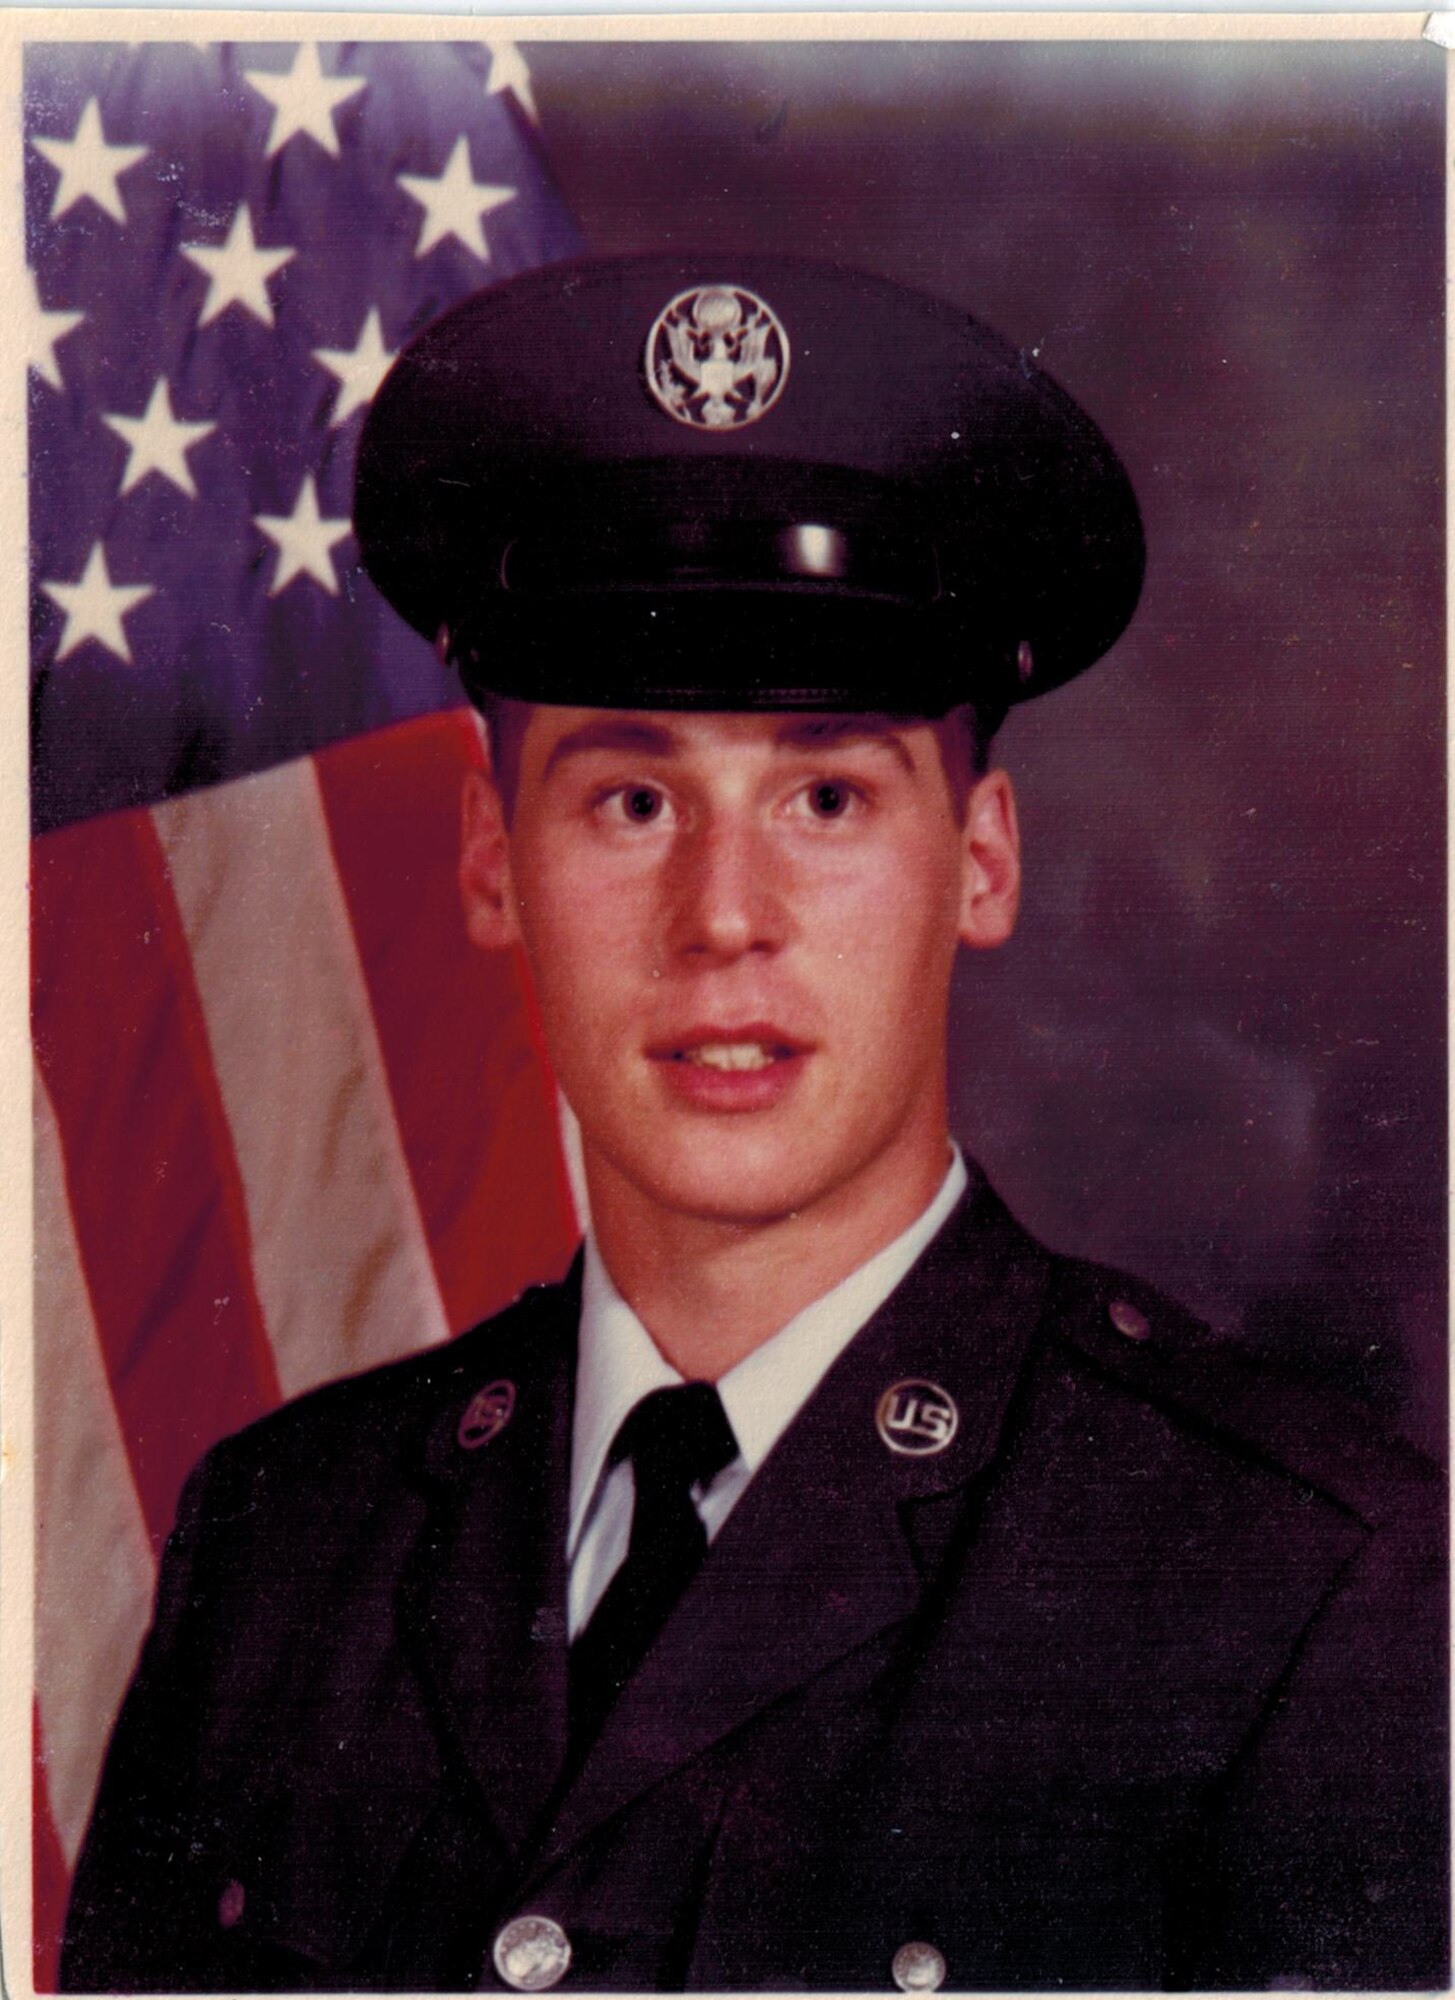 Grant Schaber started his Air Force career in 1980 as a communication, navigation, and electronic countermeasures systems technician. He served 21 years on active duty retiring as a senior master sergeant.